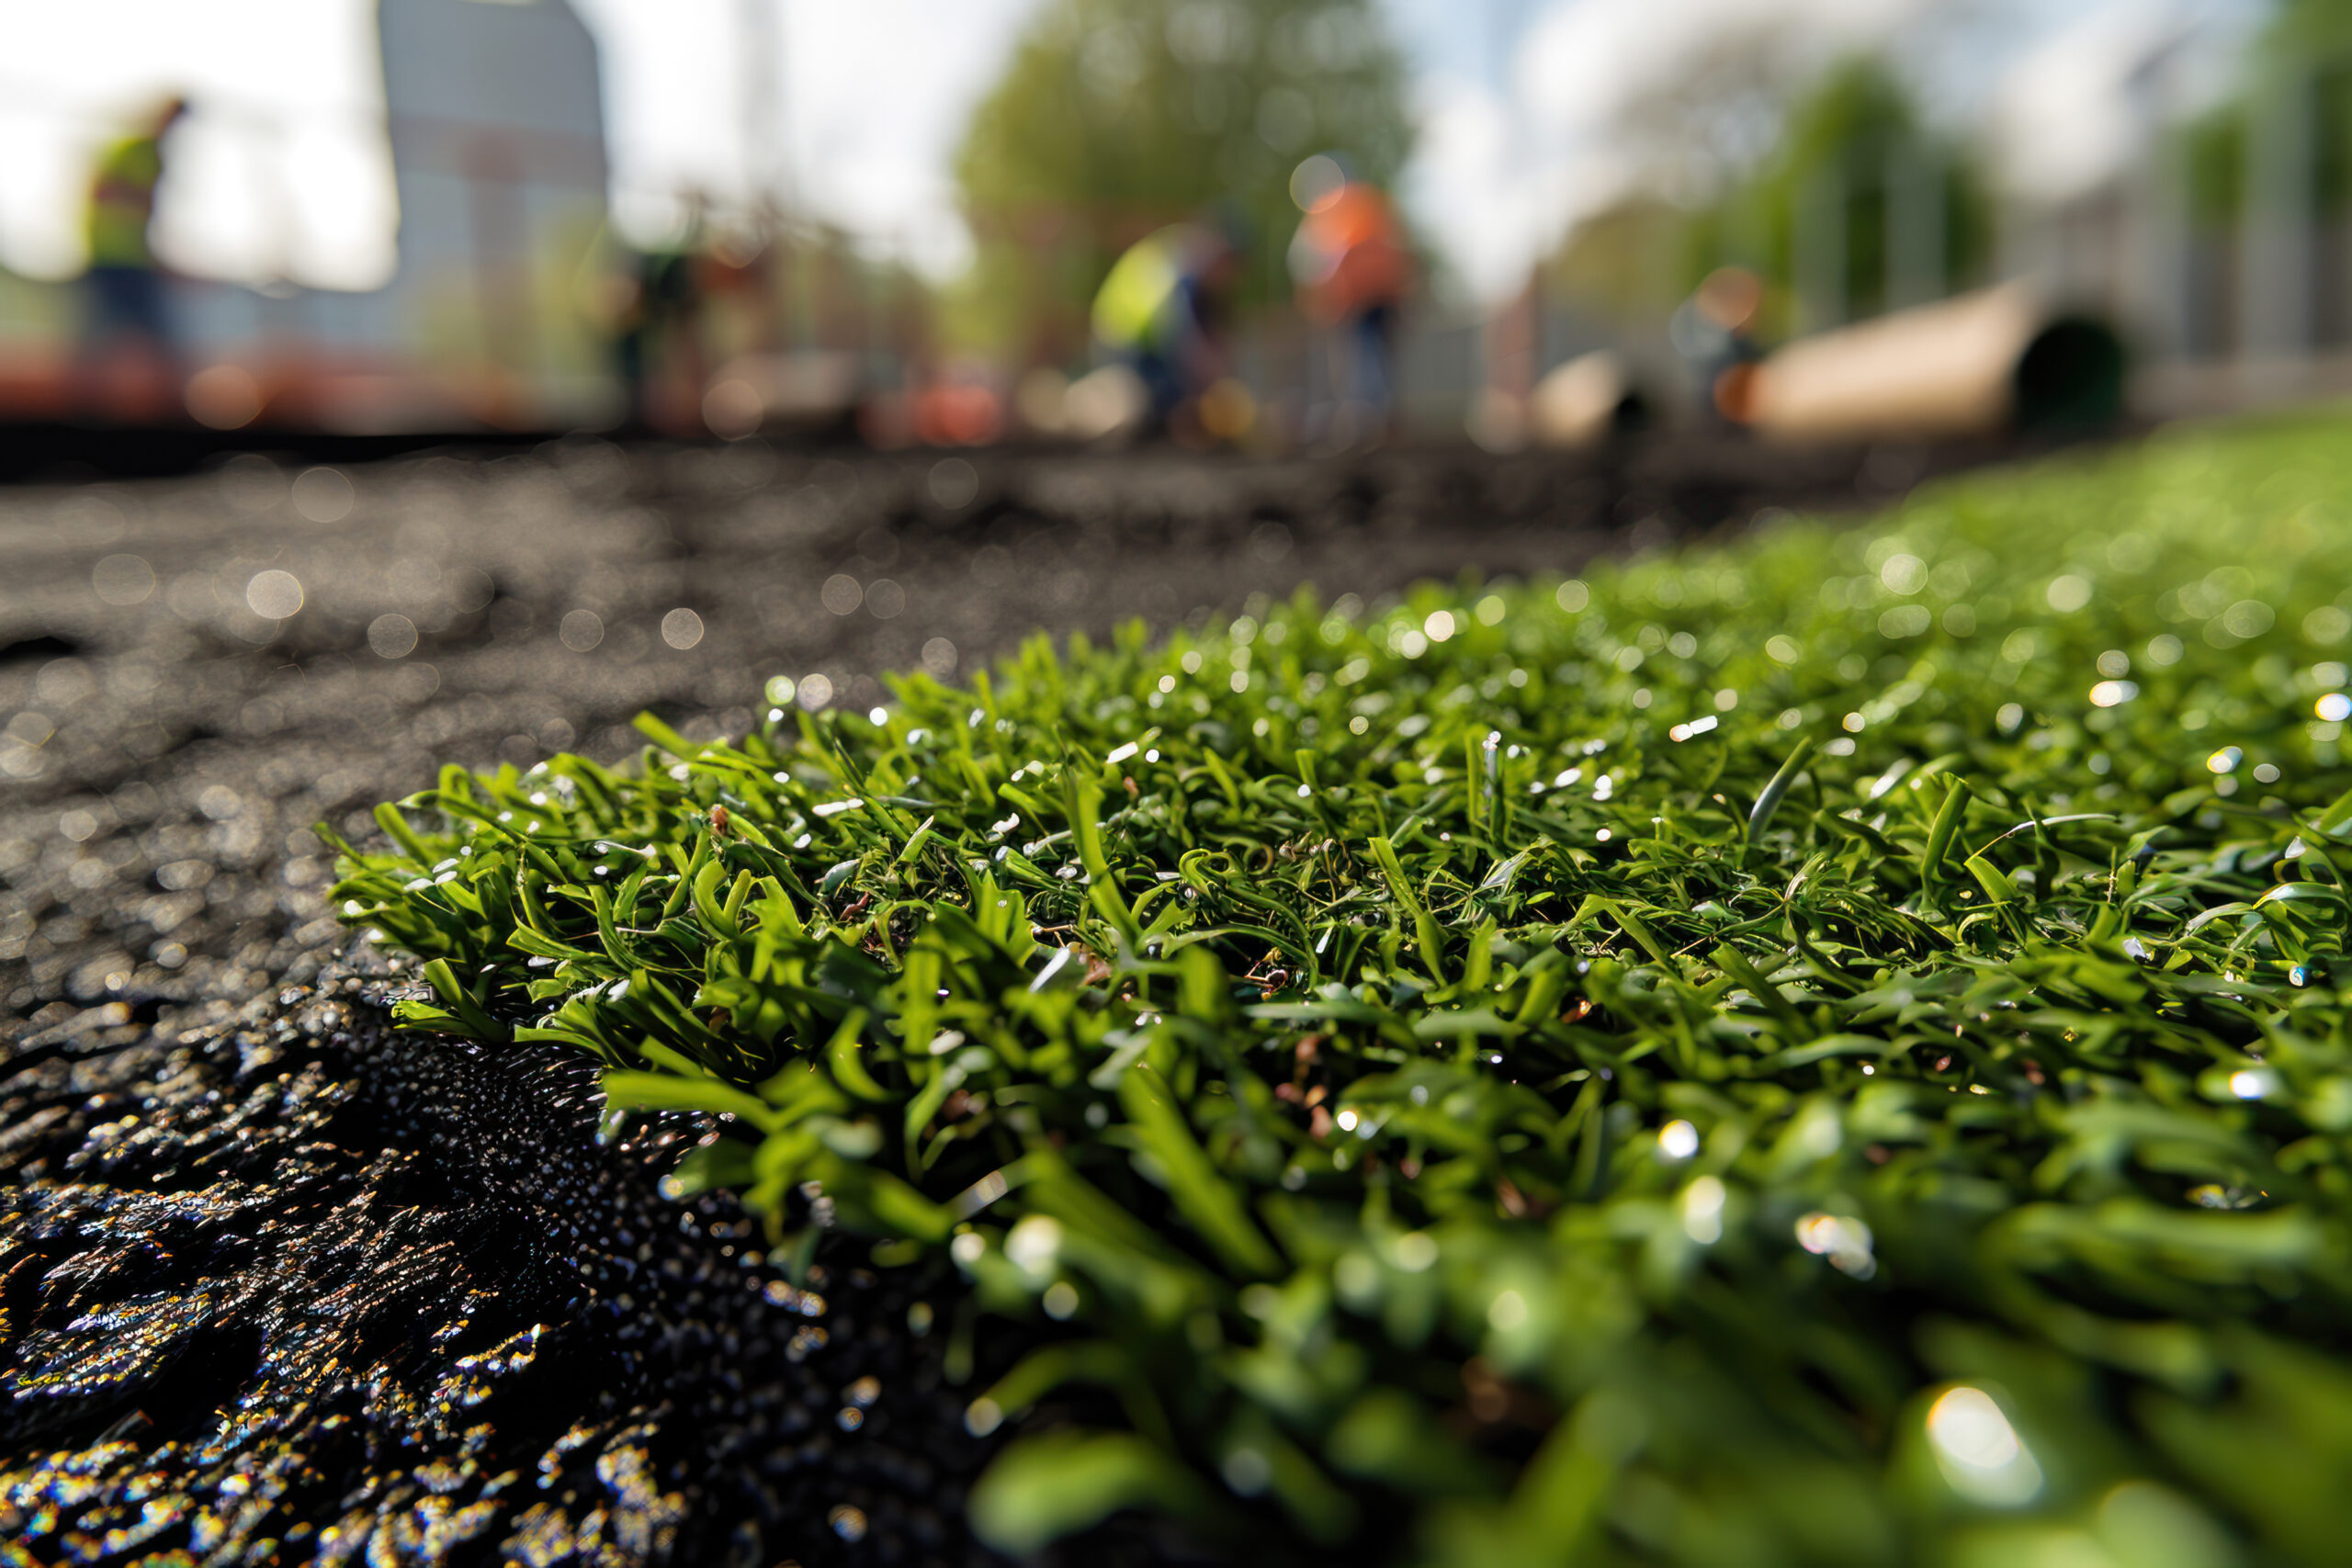 Should Artificial Turf Have A Place In Our Landscapes?